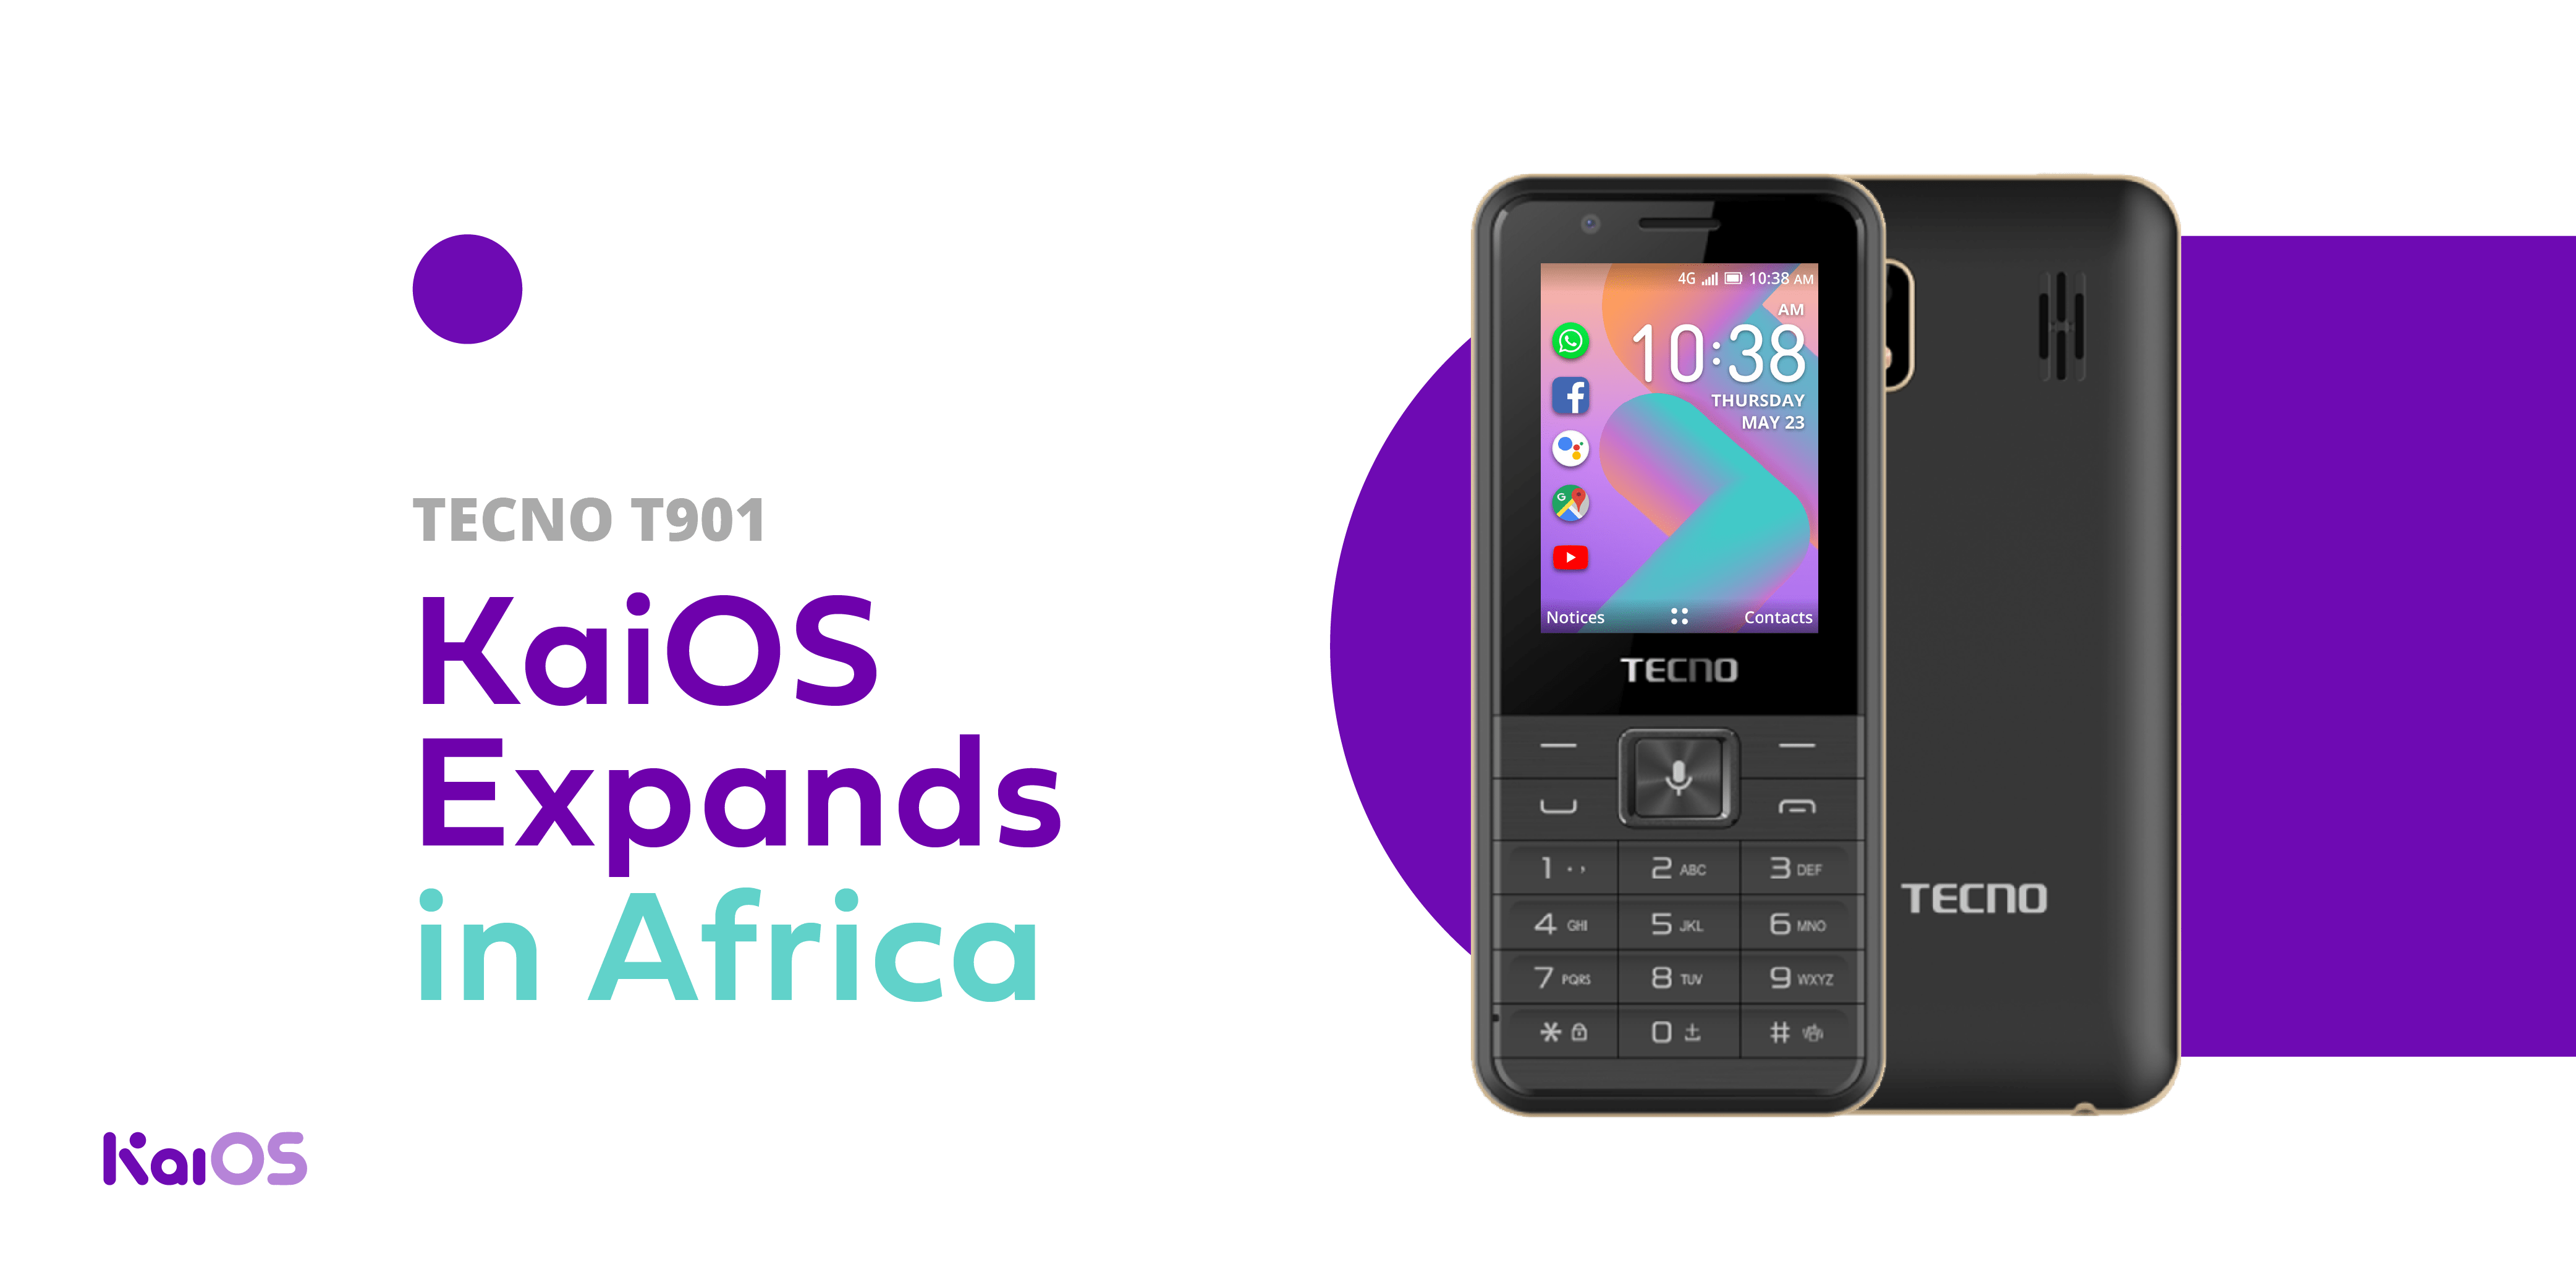 The first TECNO device running KaiOS is here: Meet the T901